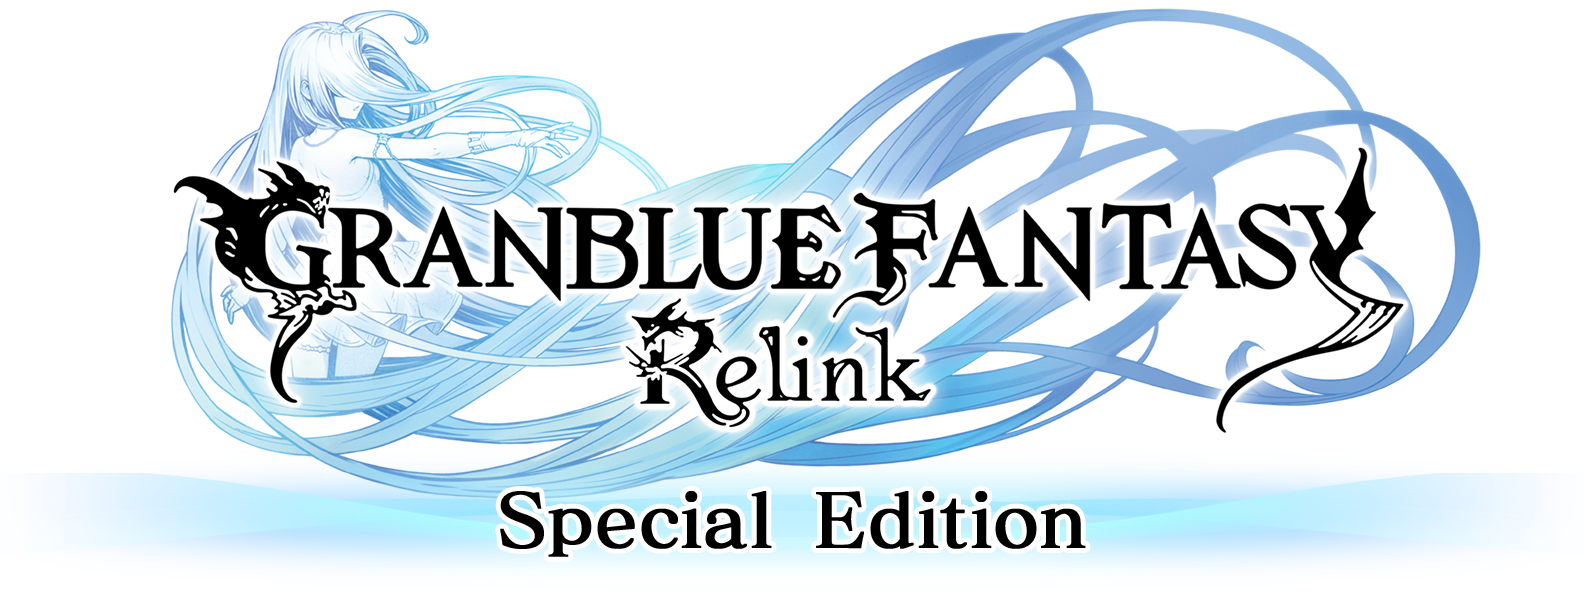 Granblue Fantasy: Relink [Deluxe Edition] for PlayStation 5